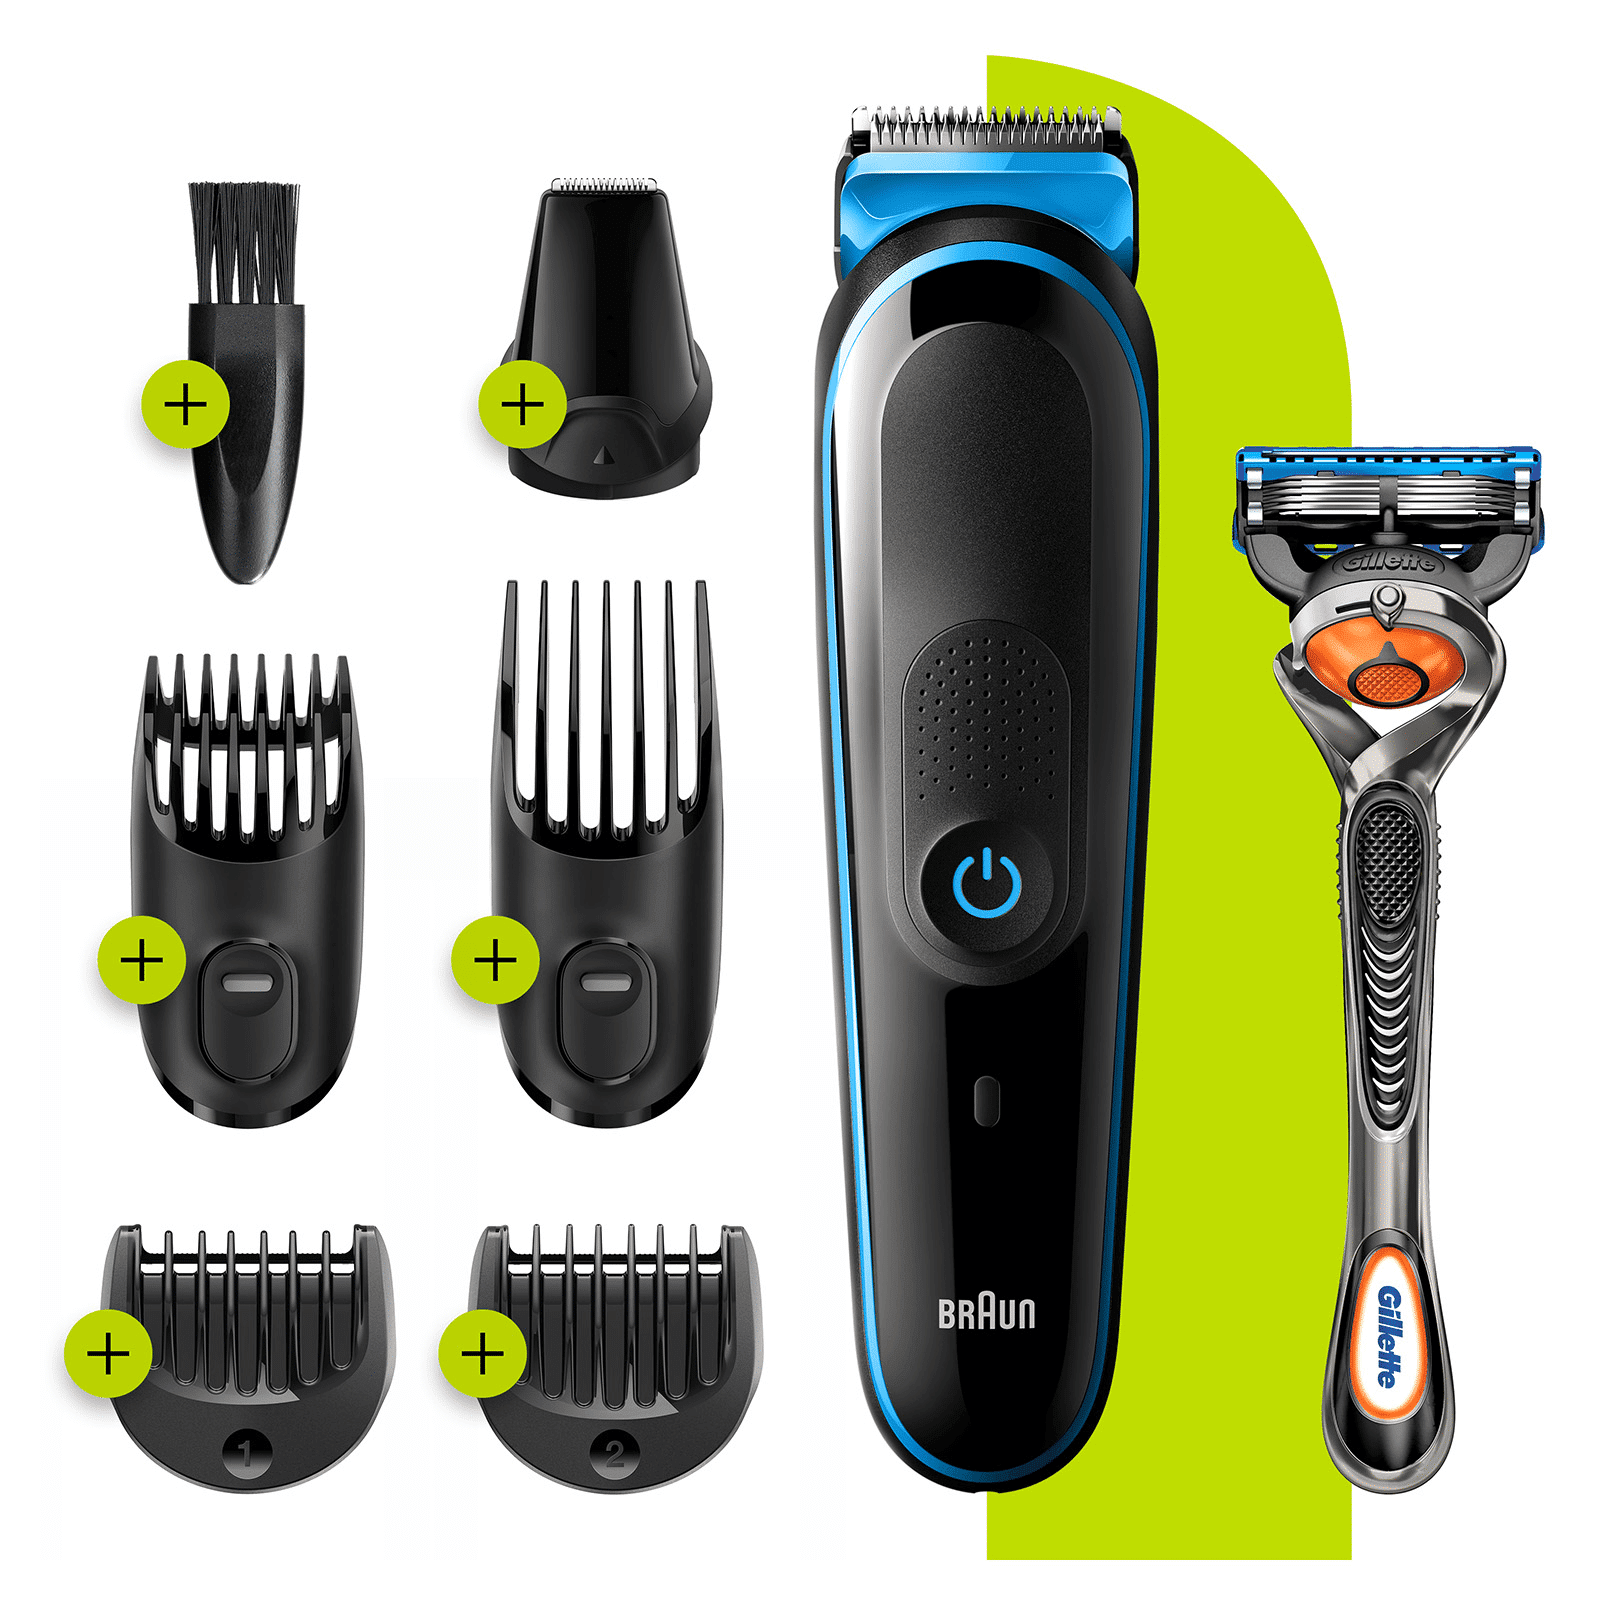 Braun All-in-one Trimmer 3 -  with Gillette Razor - 4 Combs + Detailed Trimmer + Gillette Razor